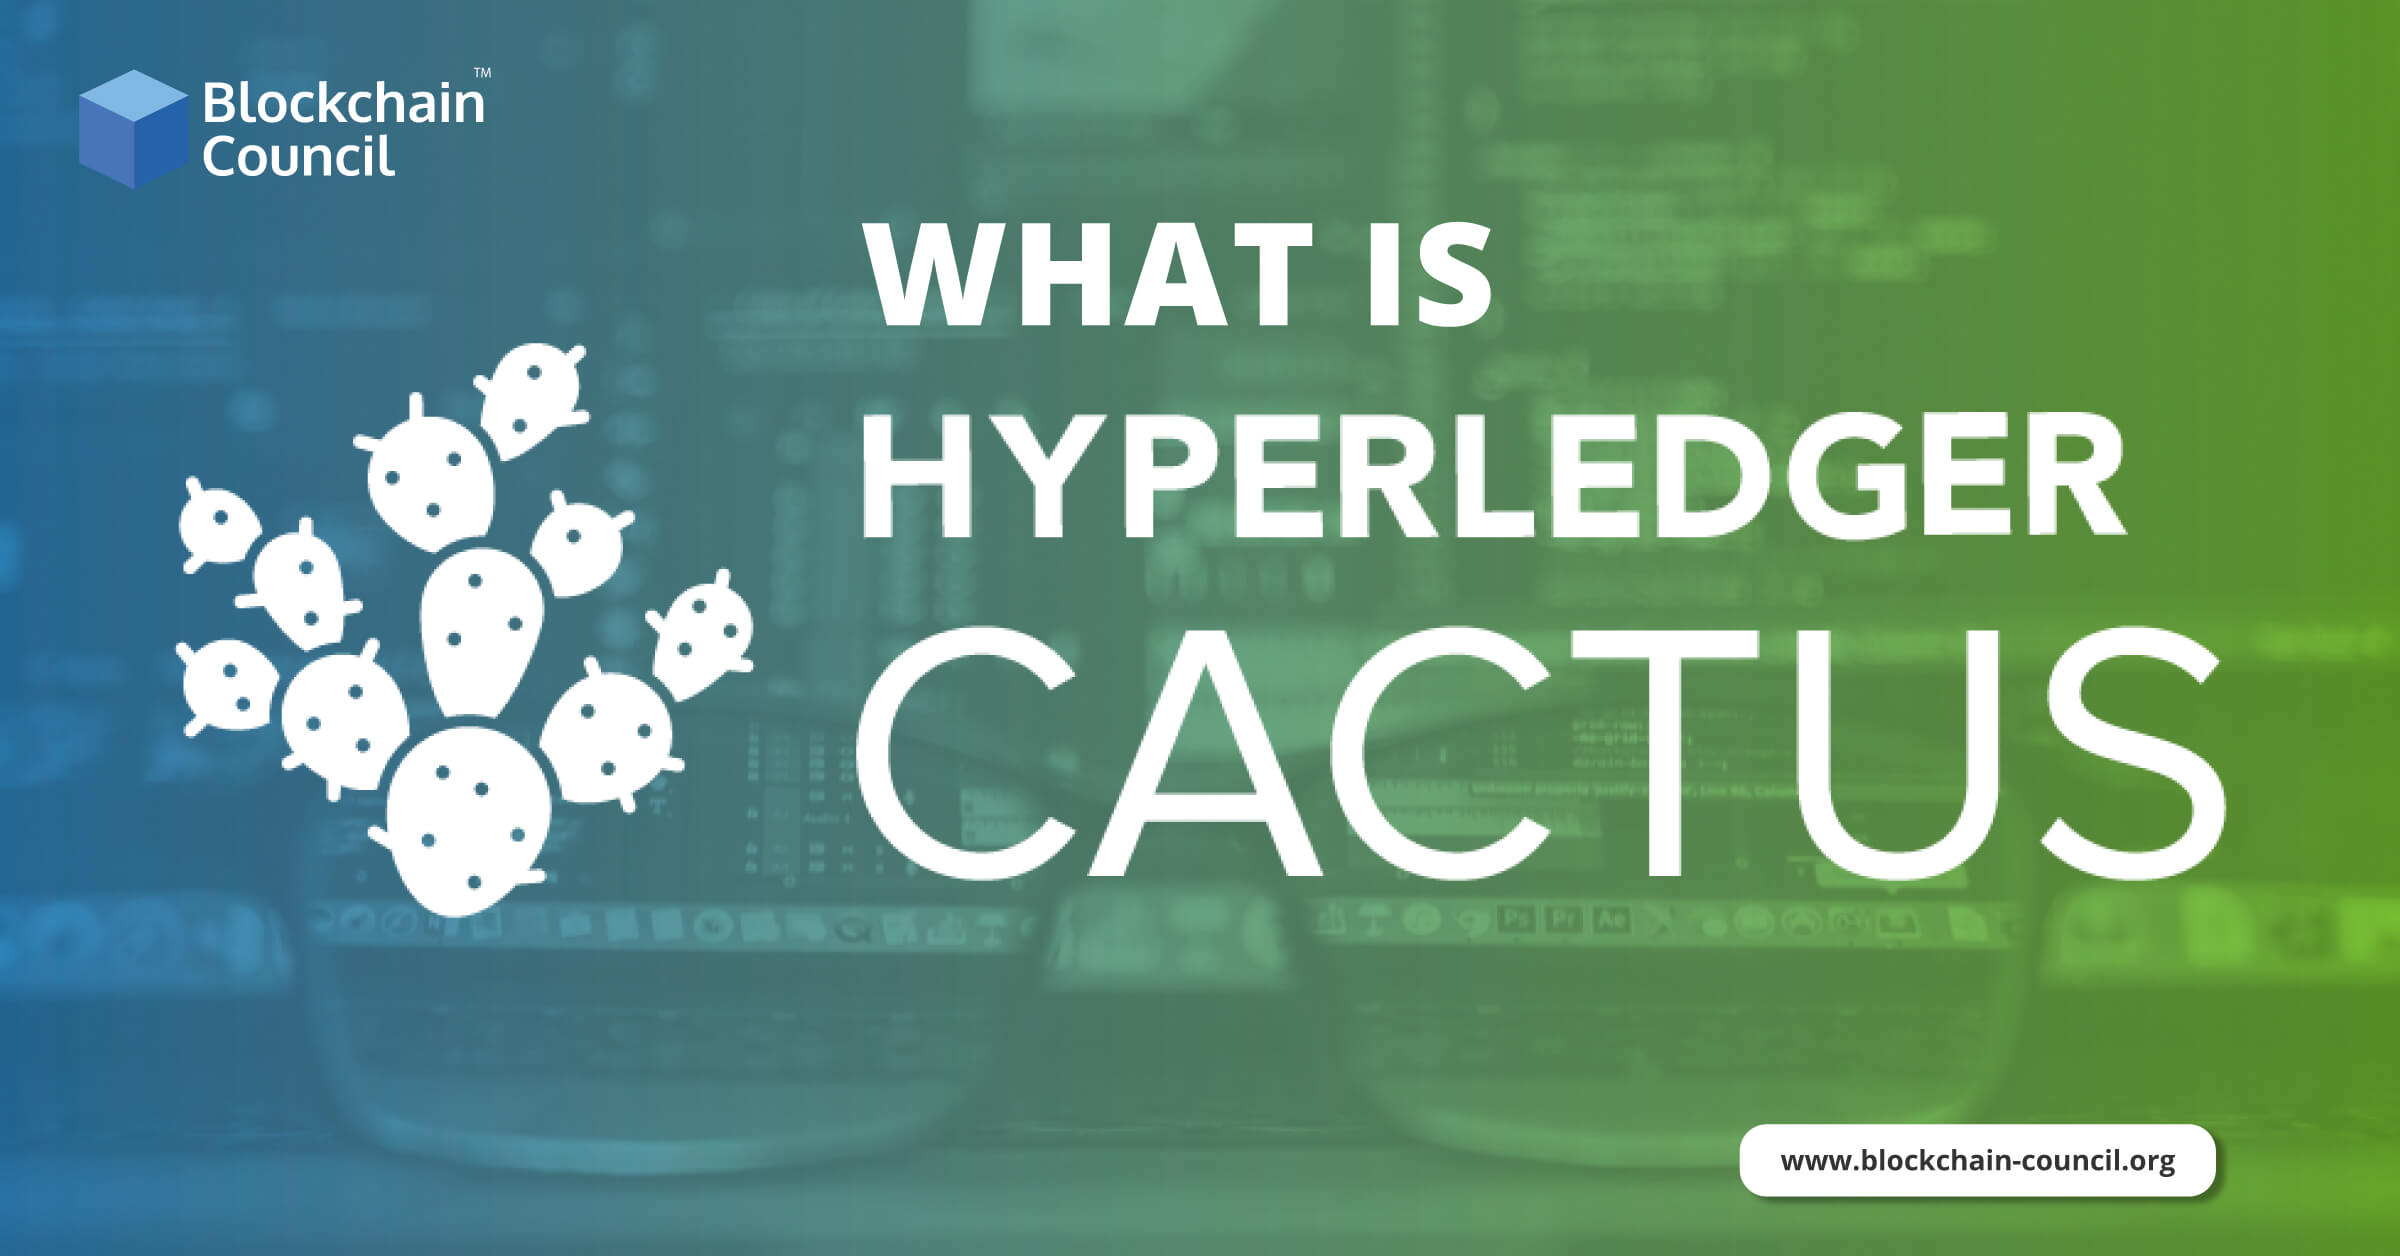 What Is Hyperledger Cactus?